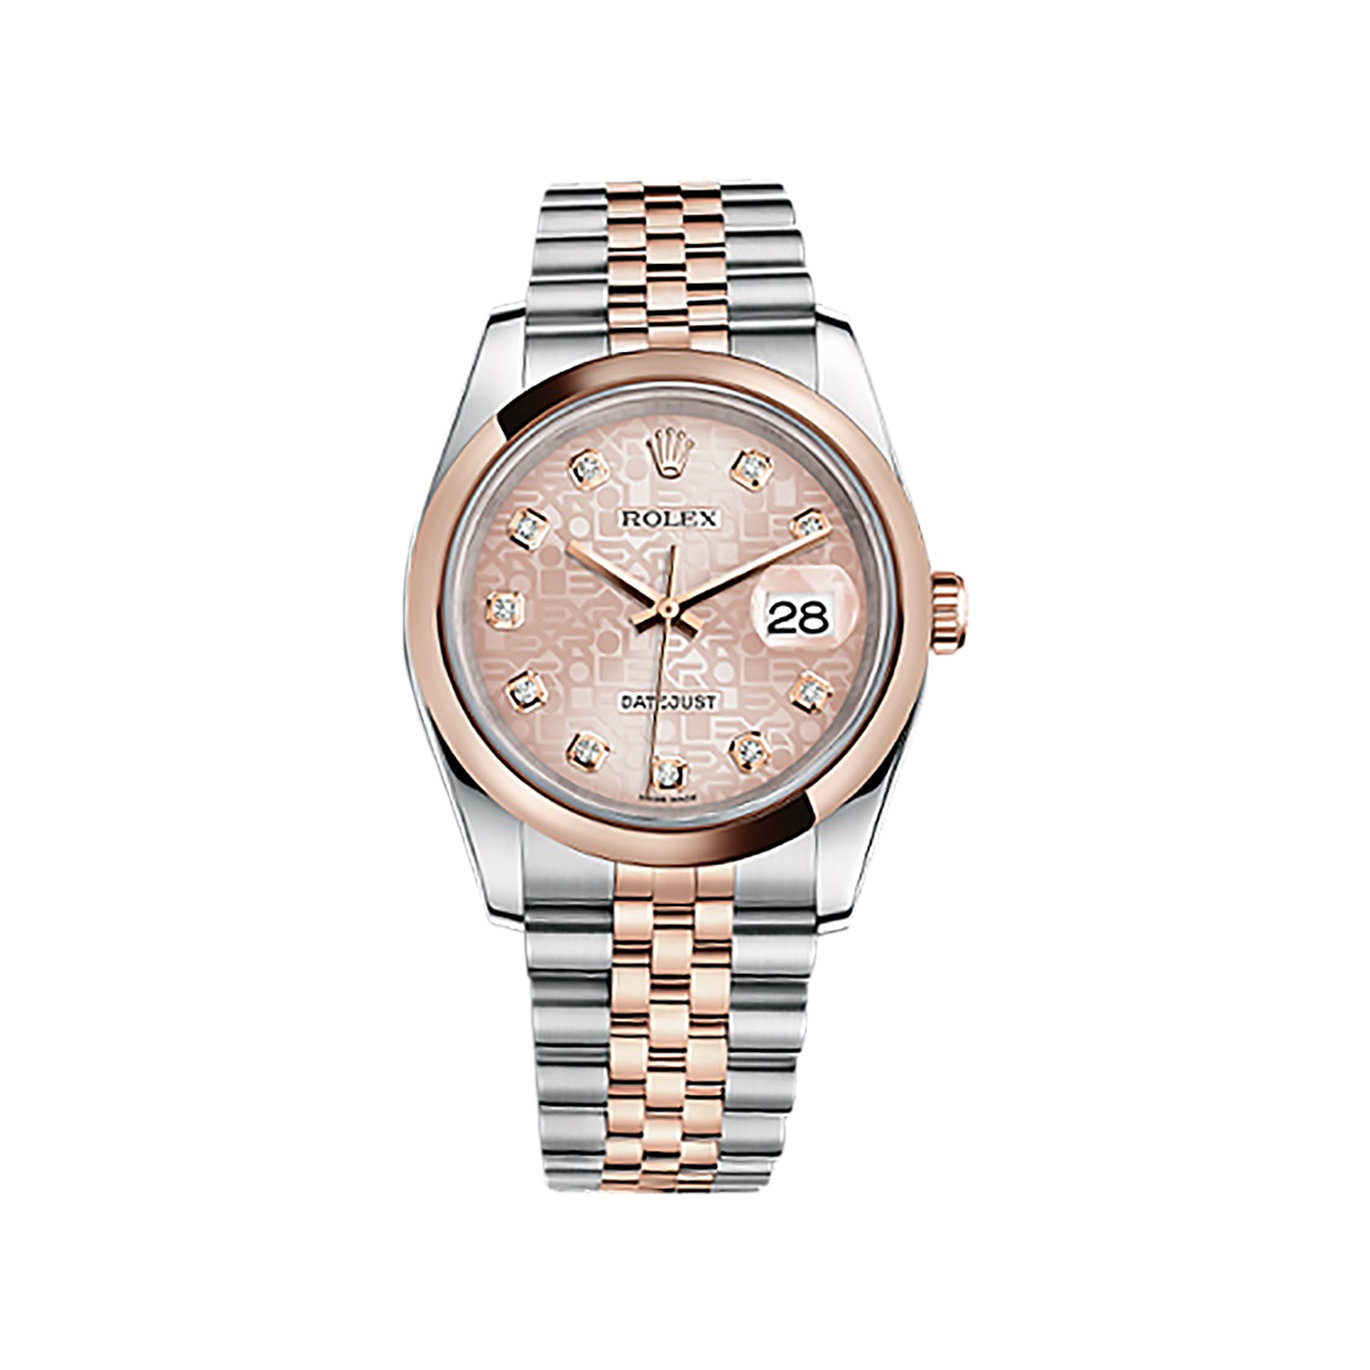 Datejust 36 116201 Rose Gold & Stainless Steel Watch (Pink Jubilee Design Set with Diamonds) - Click Image to Close